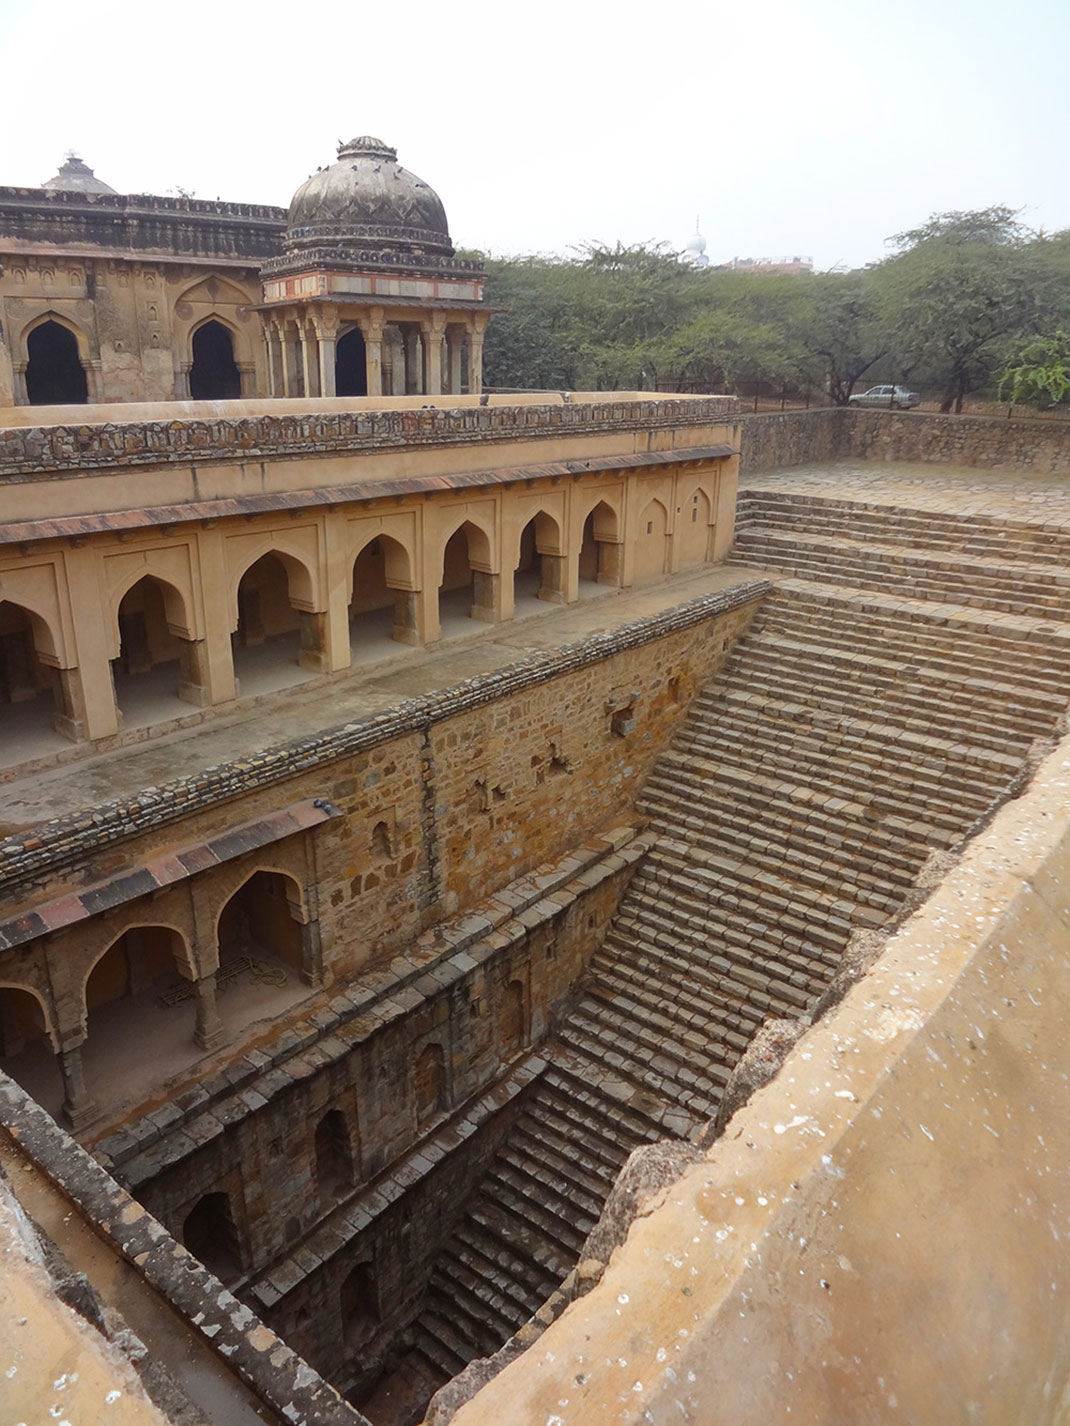 Admire These 2000 Year Old Somptous Buildings In India Destined To Disappear-6